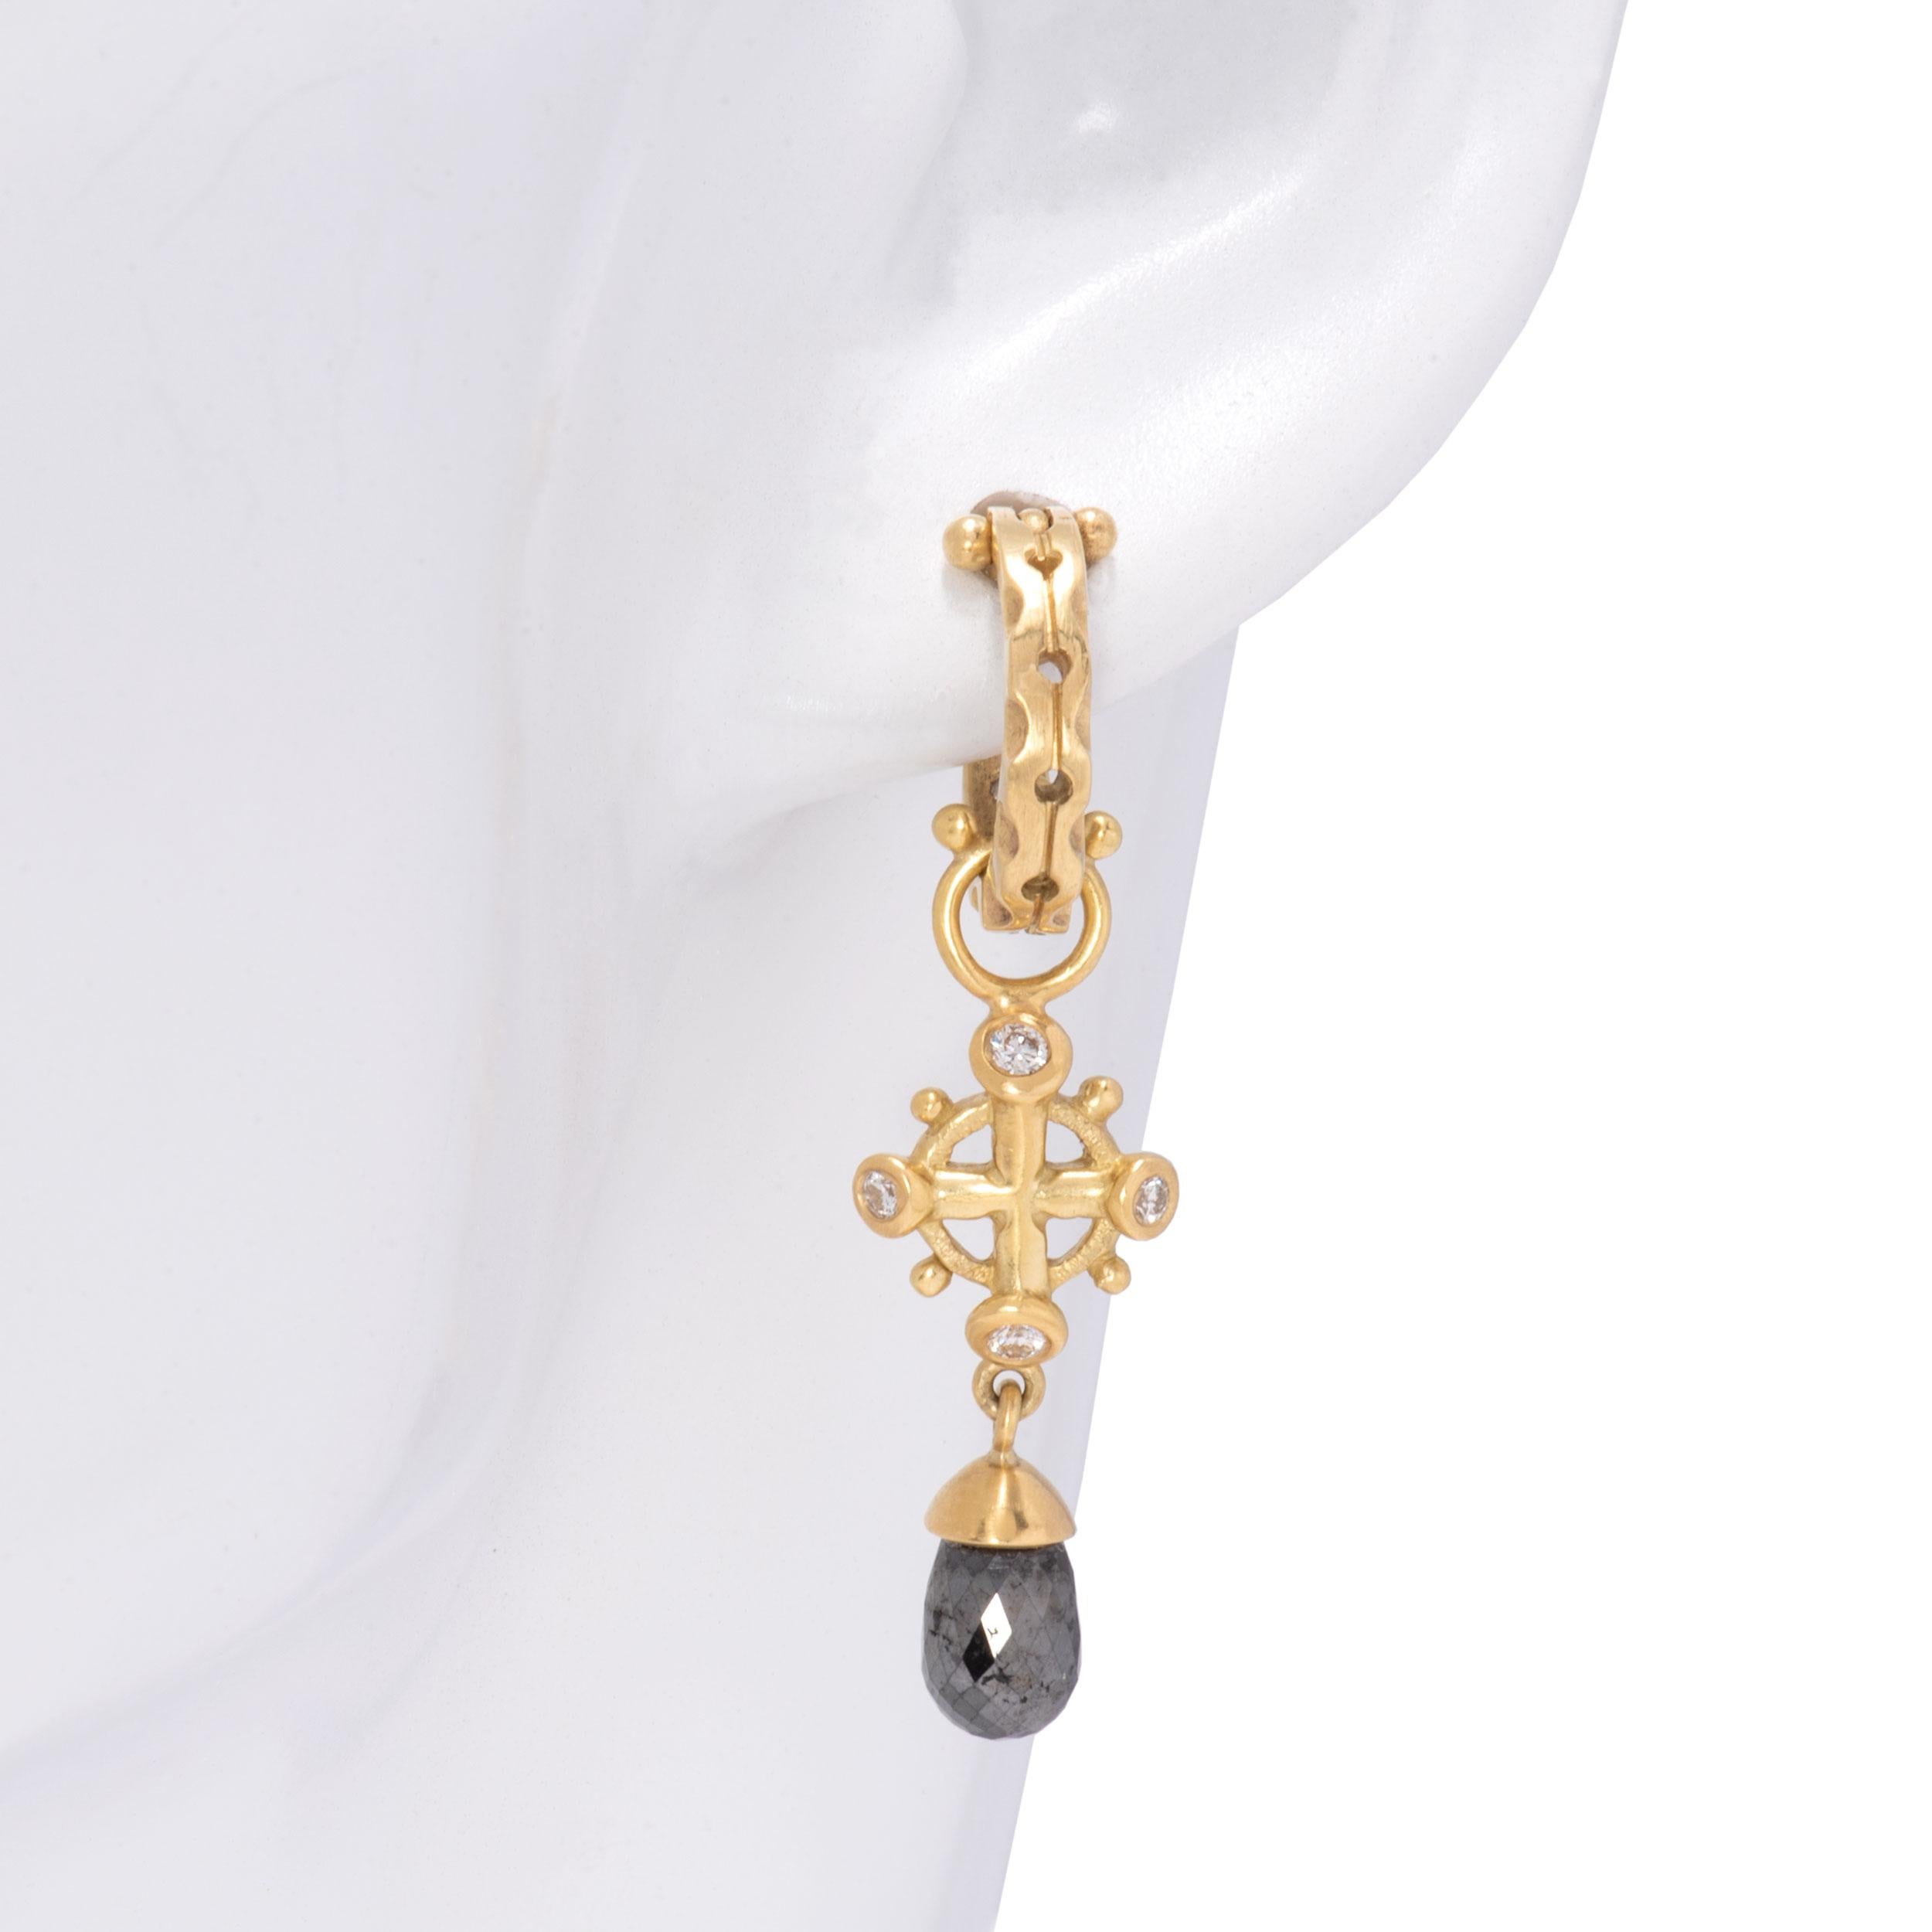 18 Karat Gold Poseidon Crown Drop Earrings with Black Diamond Briolettes In New Condition For Sale In Santa Fe, NM